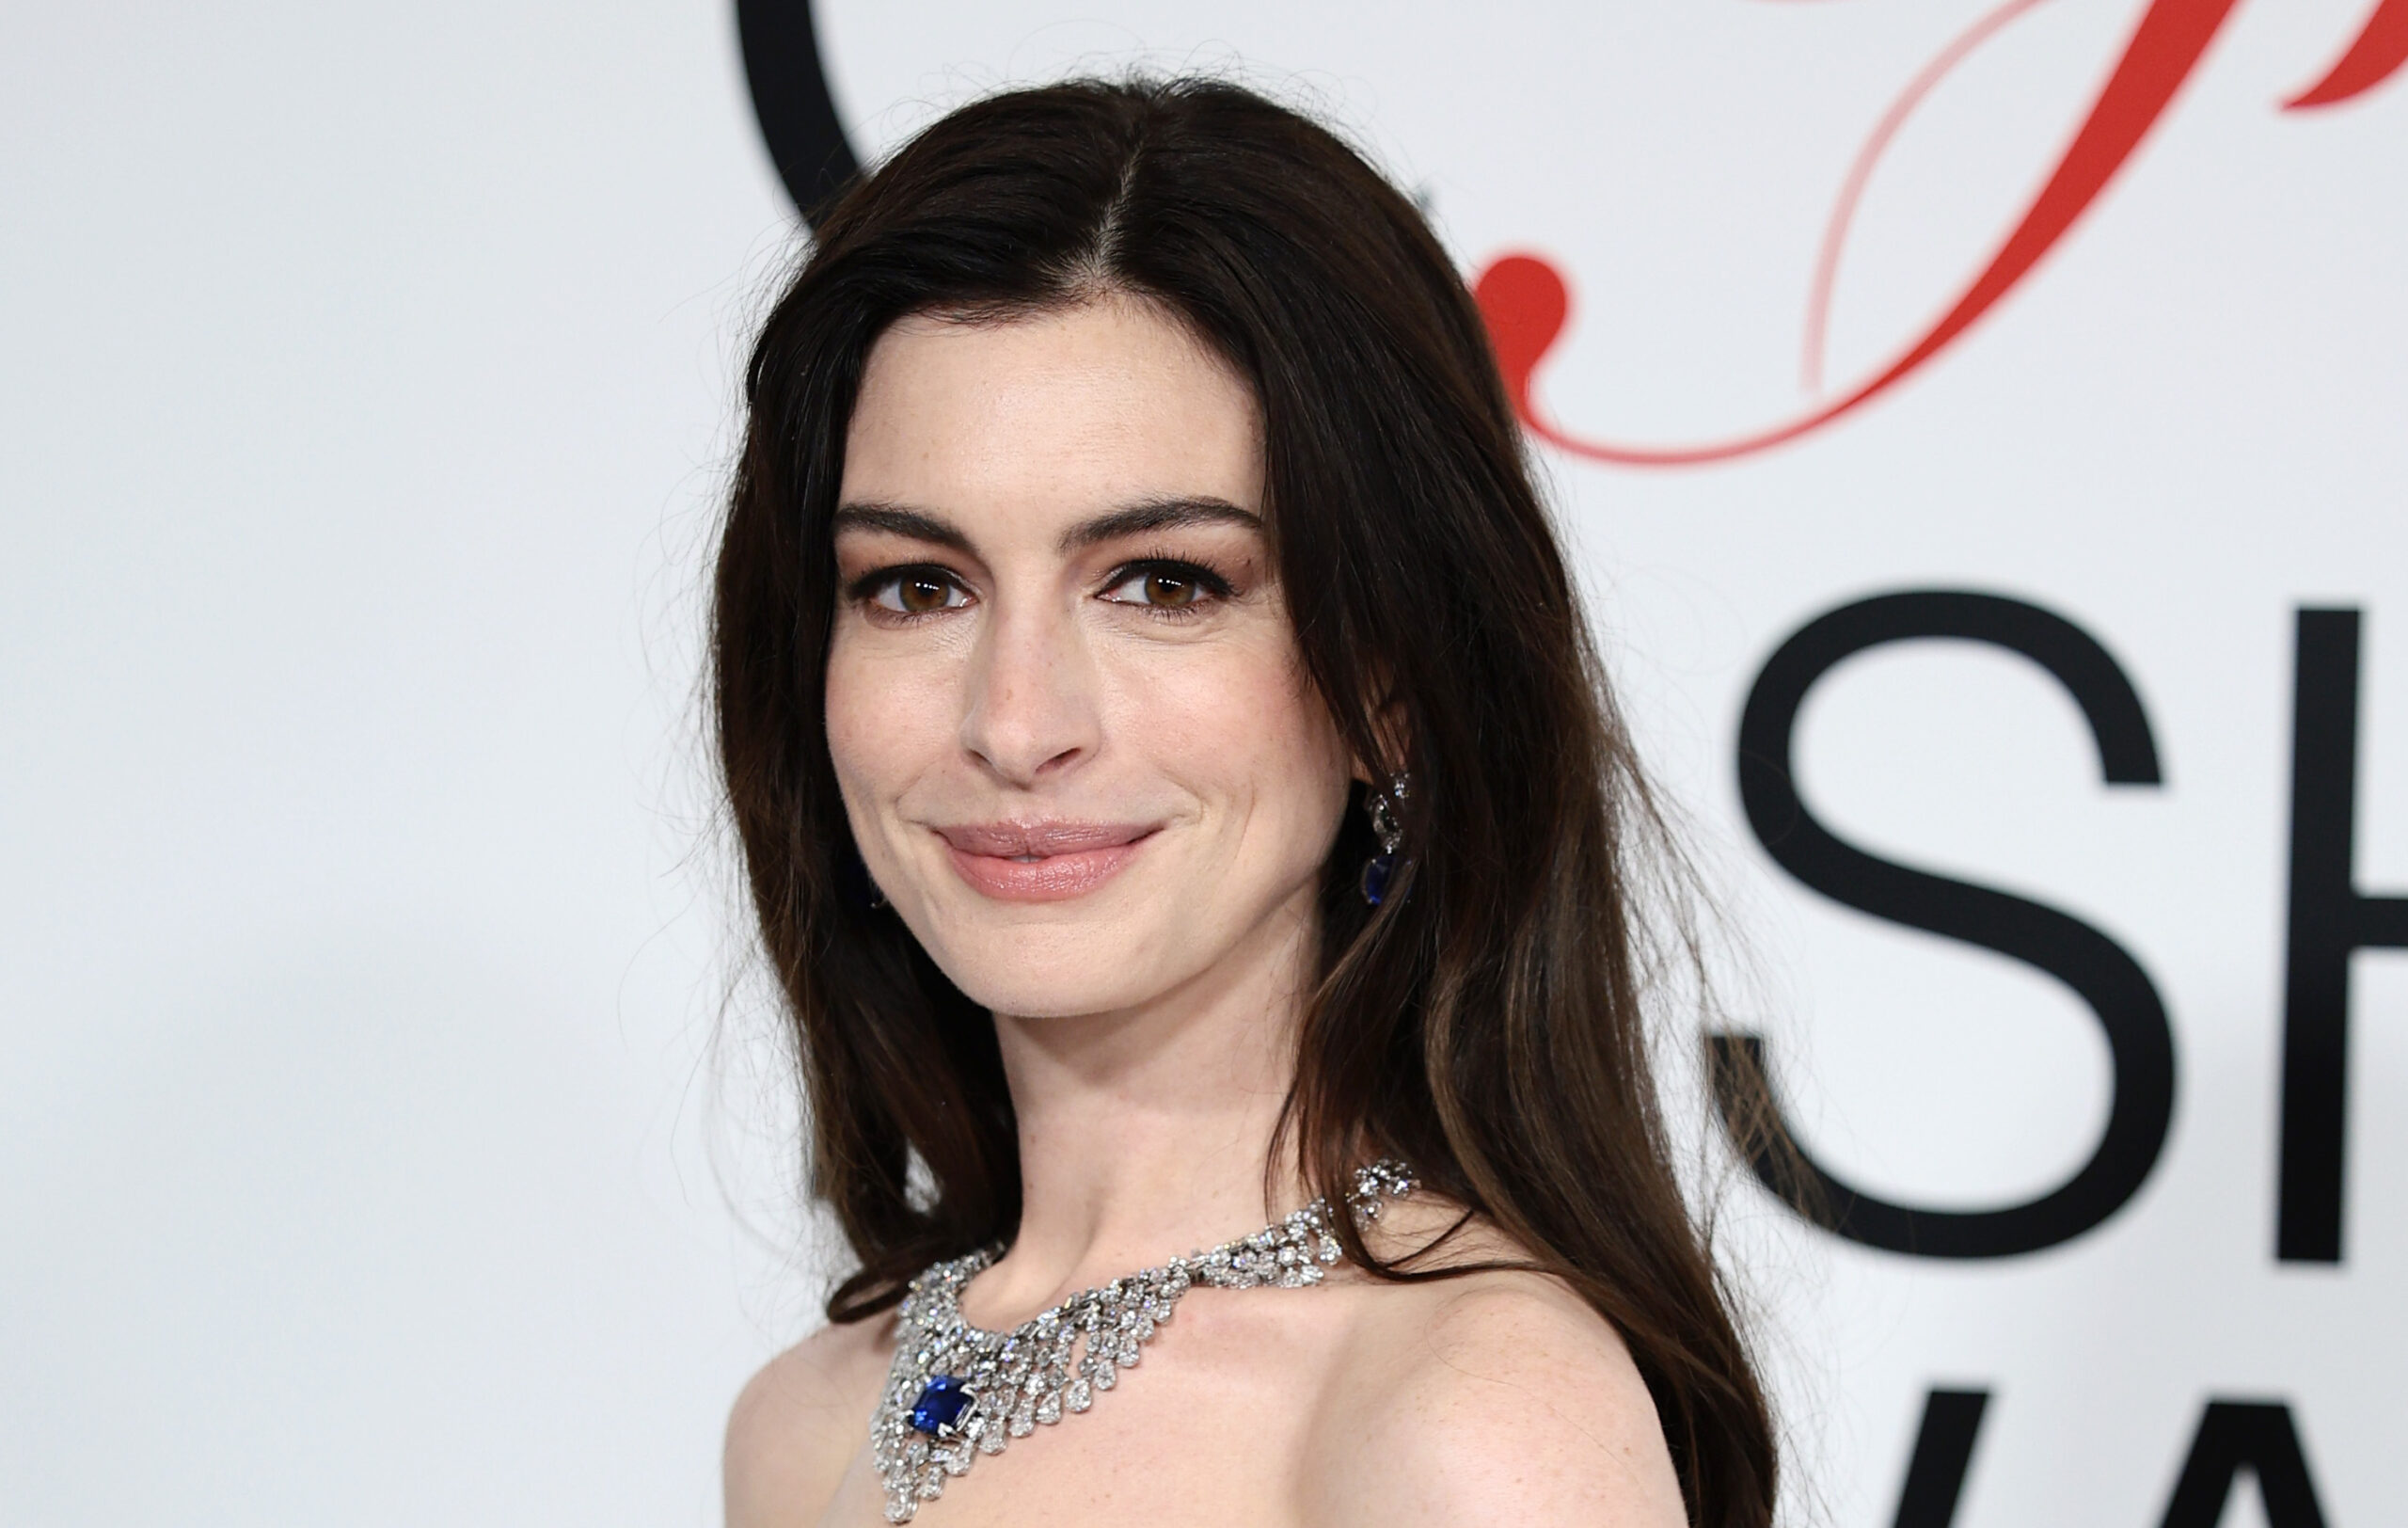 Anne Hathaway celebrates 5 years of sobriety: A significant milestone in her journey